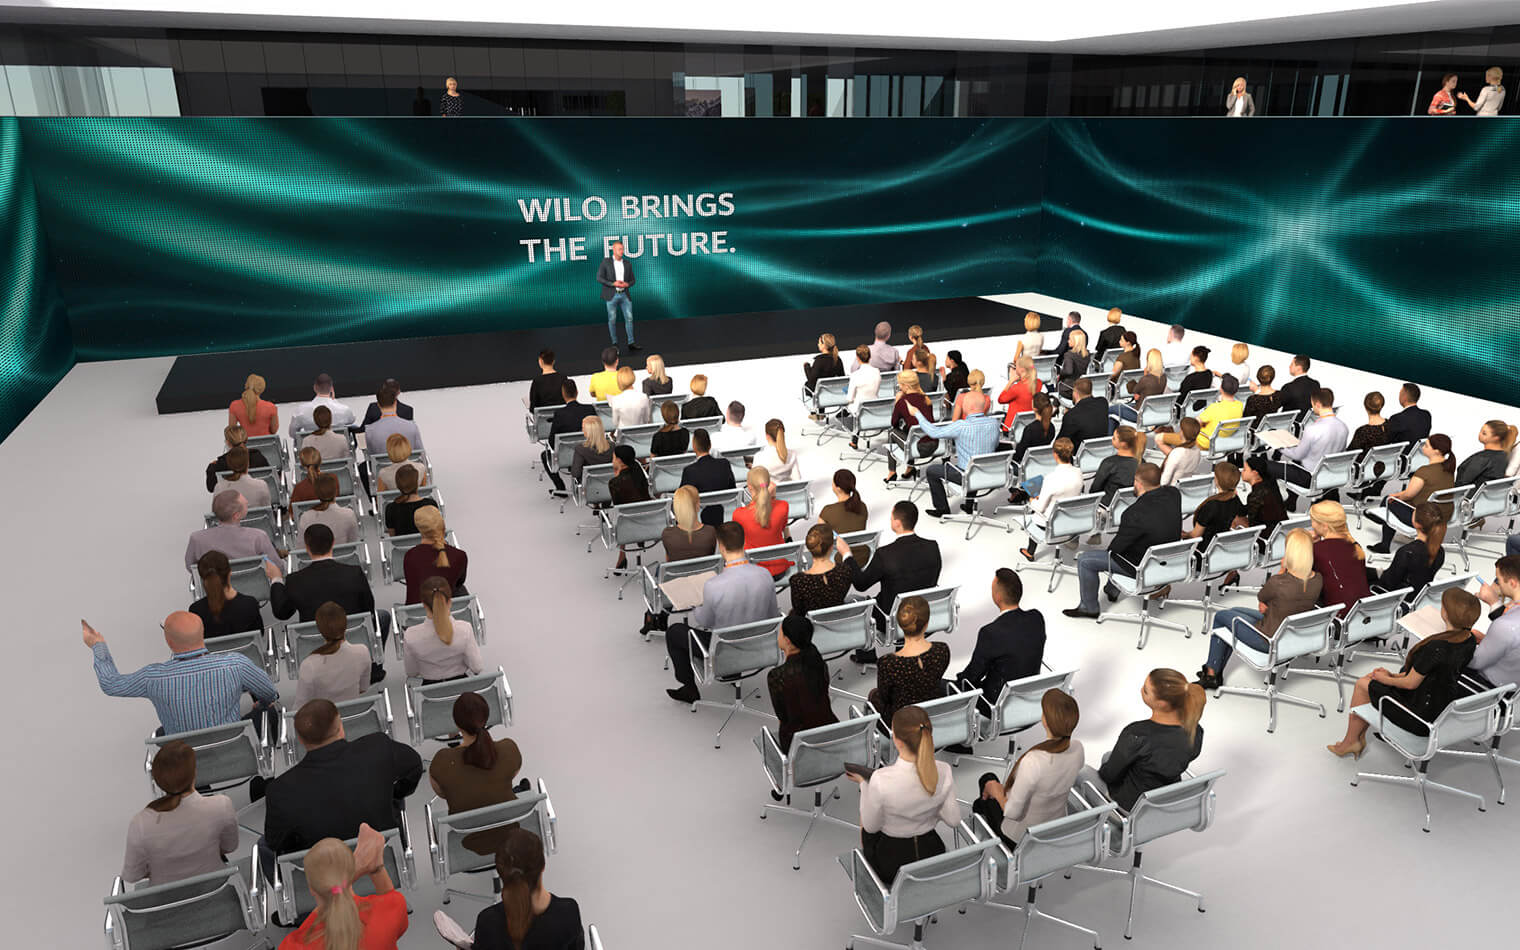 This picture shows a large presentation in the reception area of the Wilo Networking Cube building.